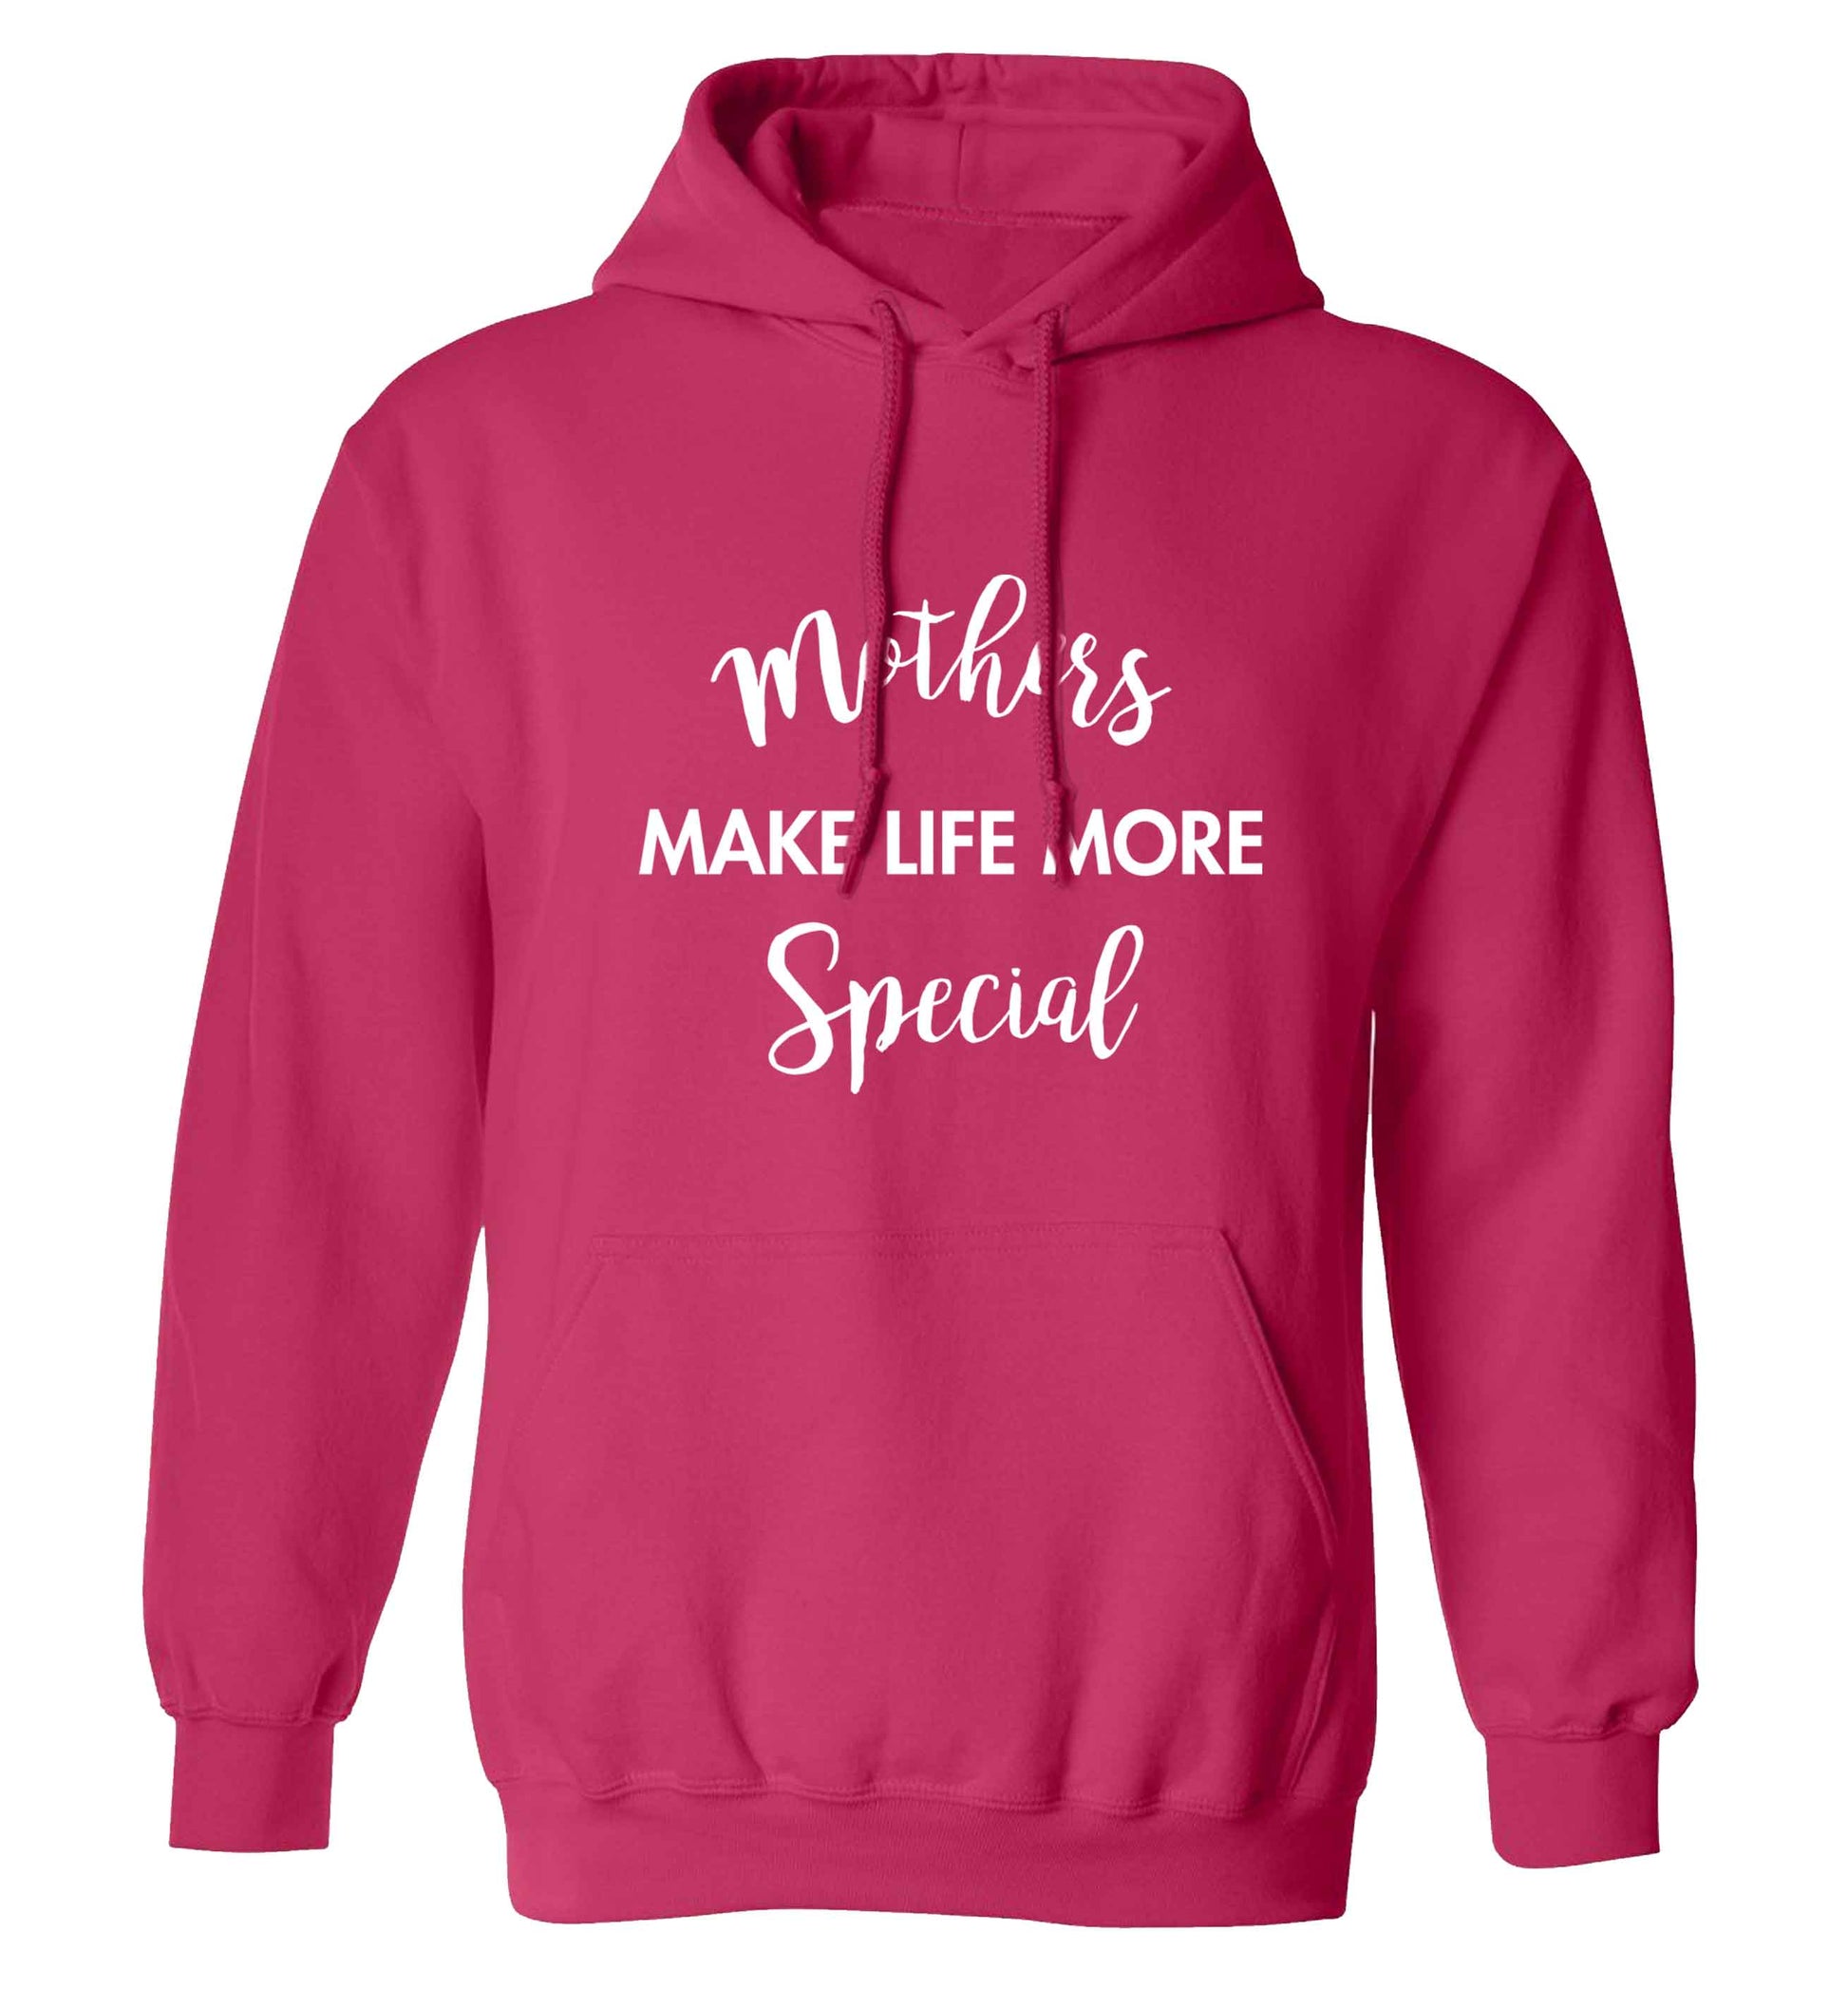 Mother's make life more special adults unisex pink hoodie 2XL